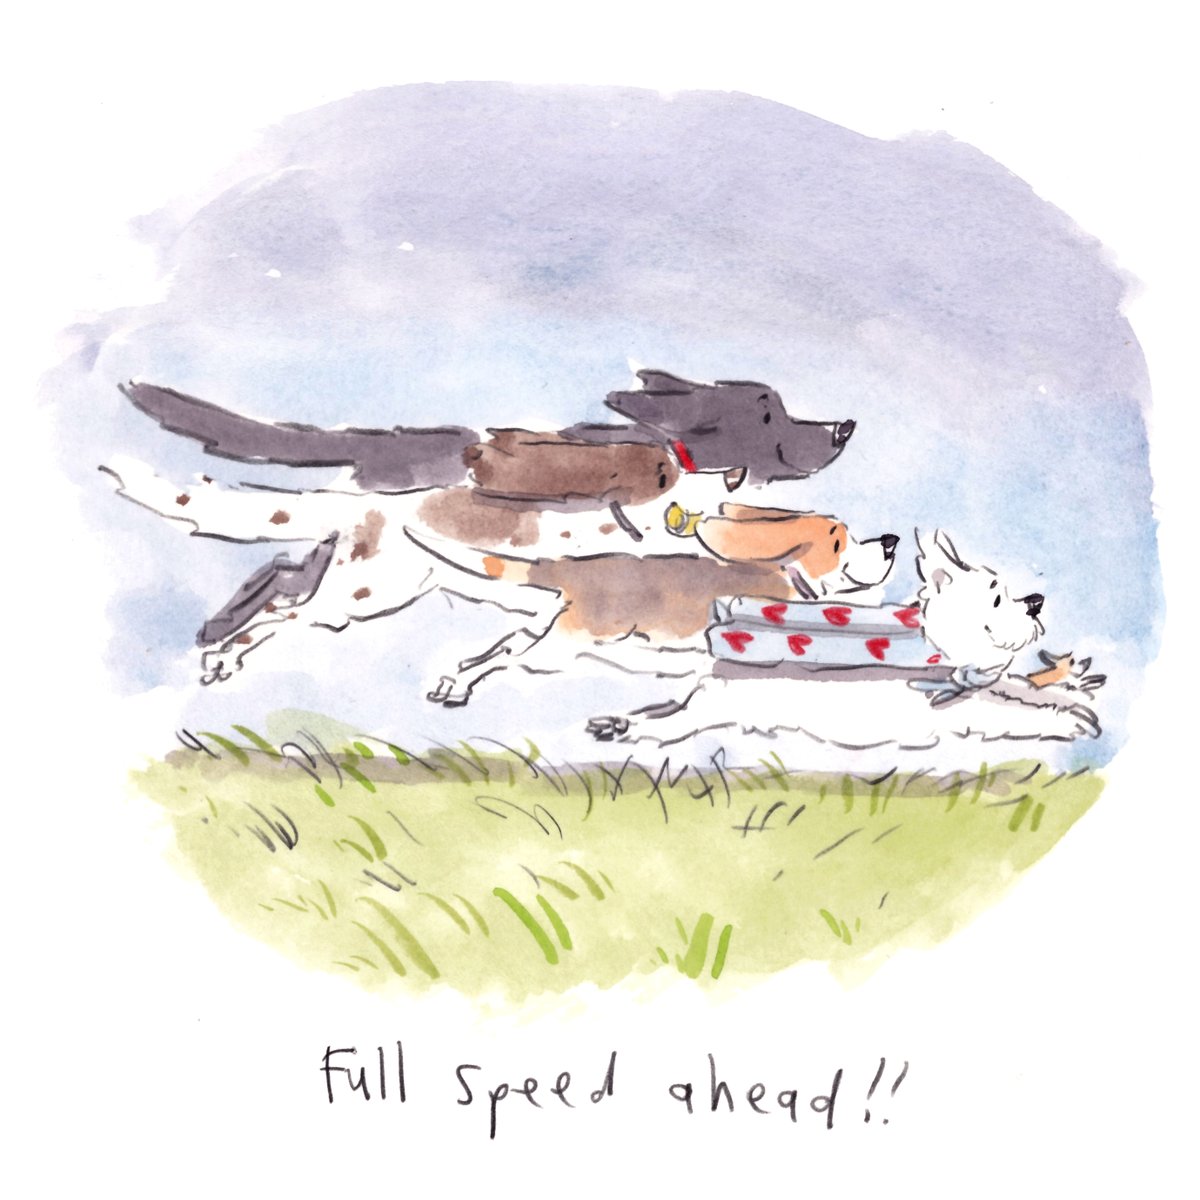 Good night, lovely people and lovely dogs.
I'm wishing you the very best for a super wonderful weekend. 
Sleep well and sweet dreams. 
#hoorayfordogs #springer #labrador #beagle #westie #redsquirrel #fullspeedahead